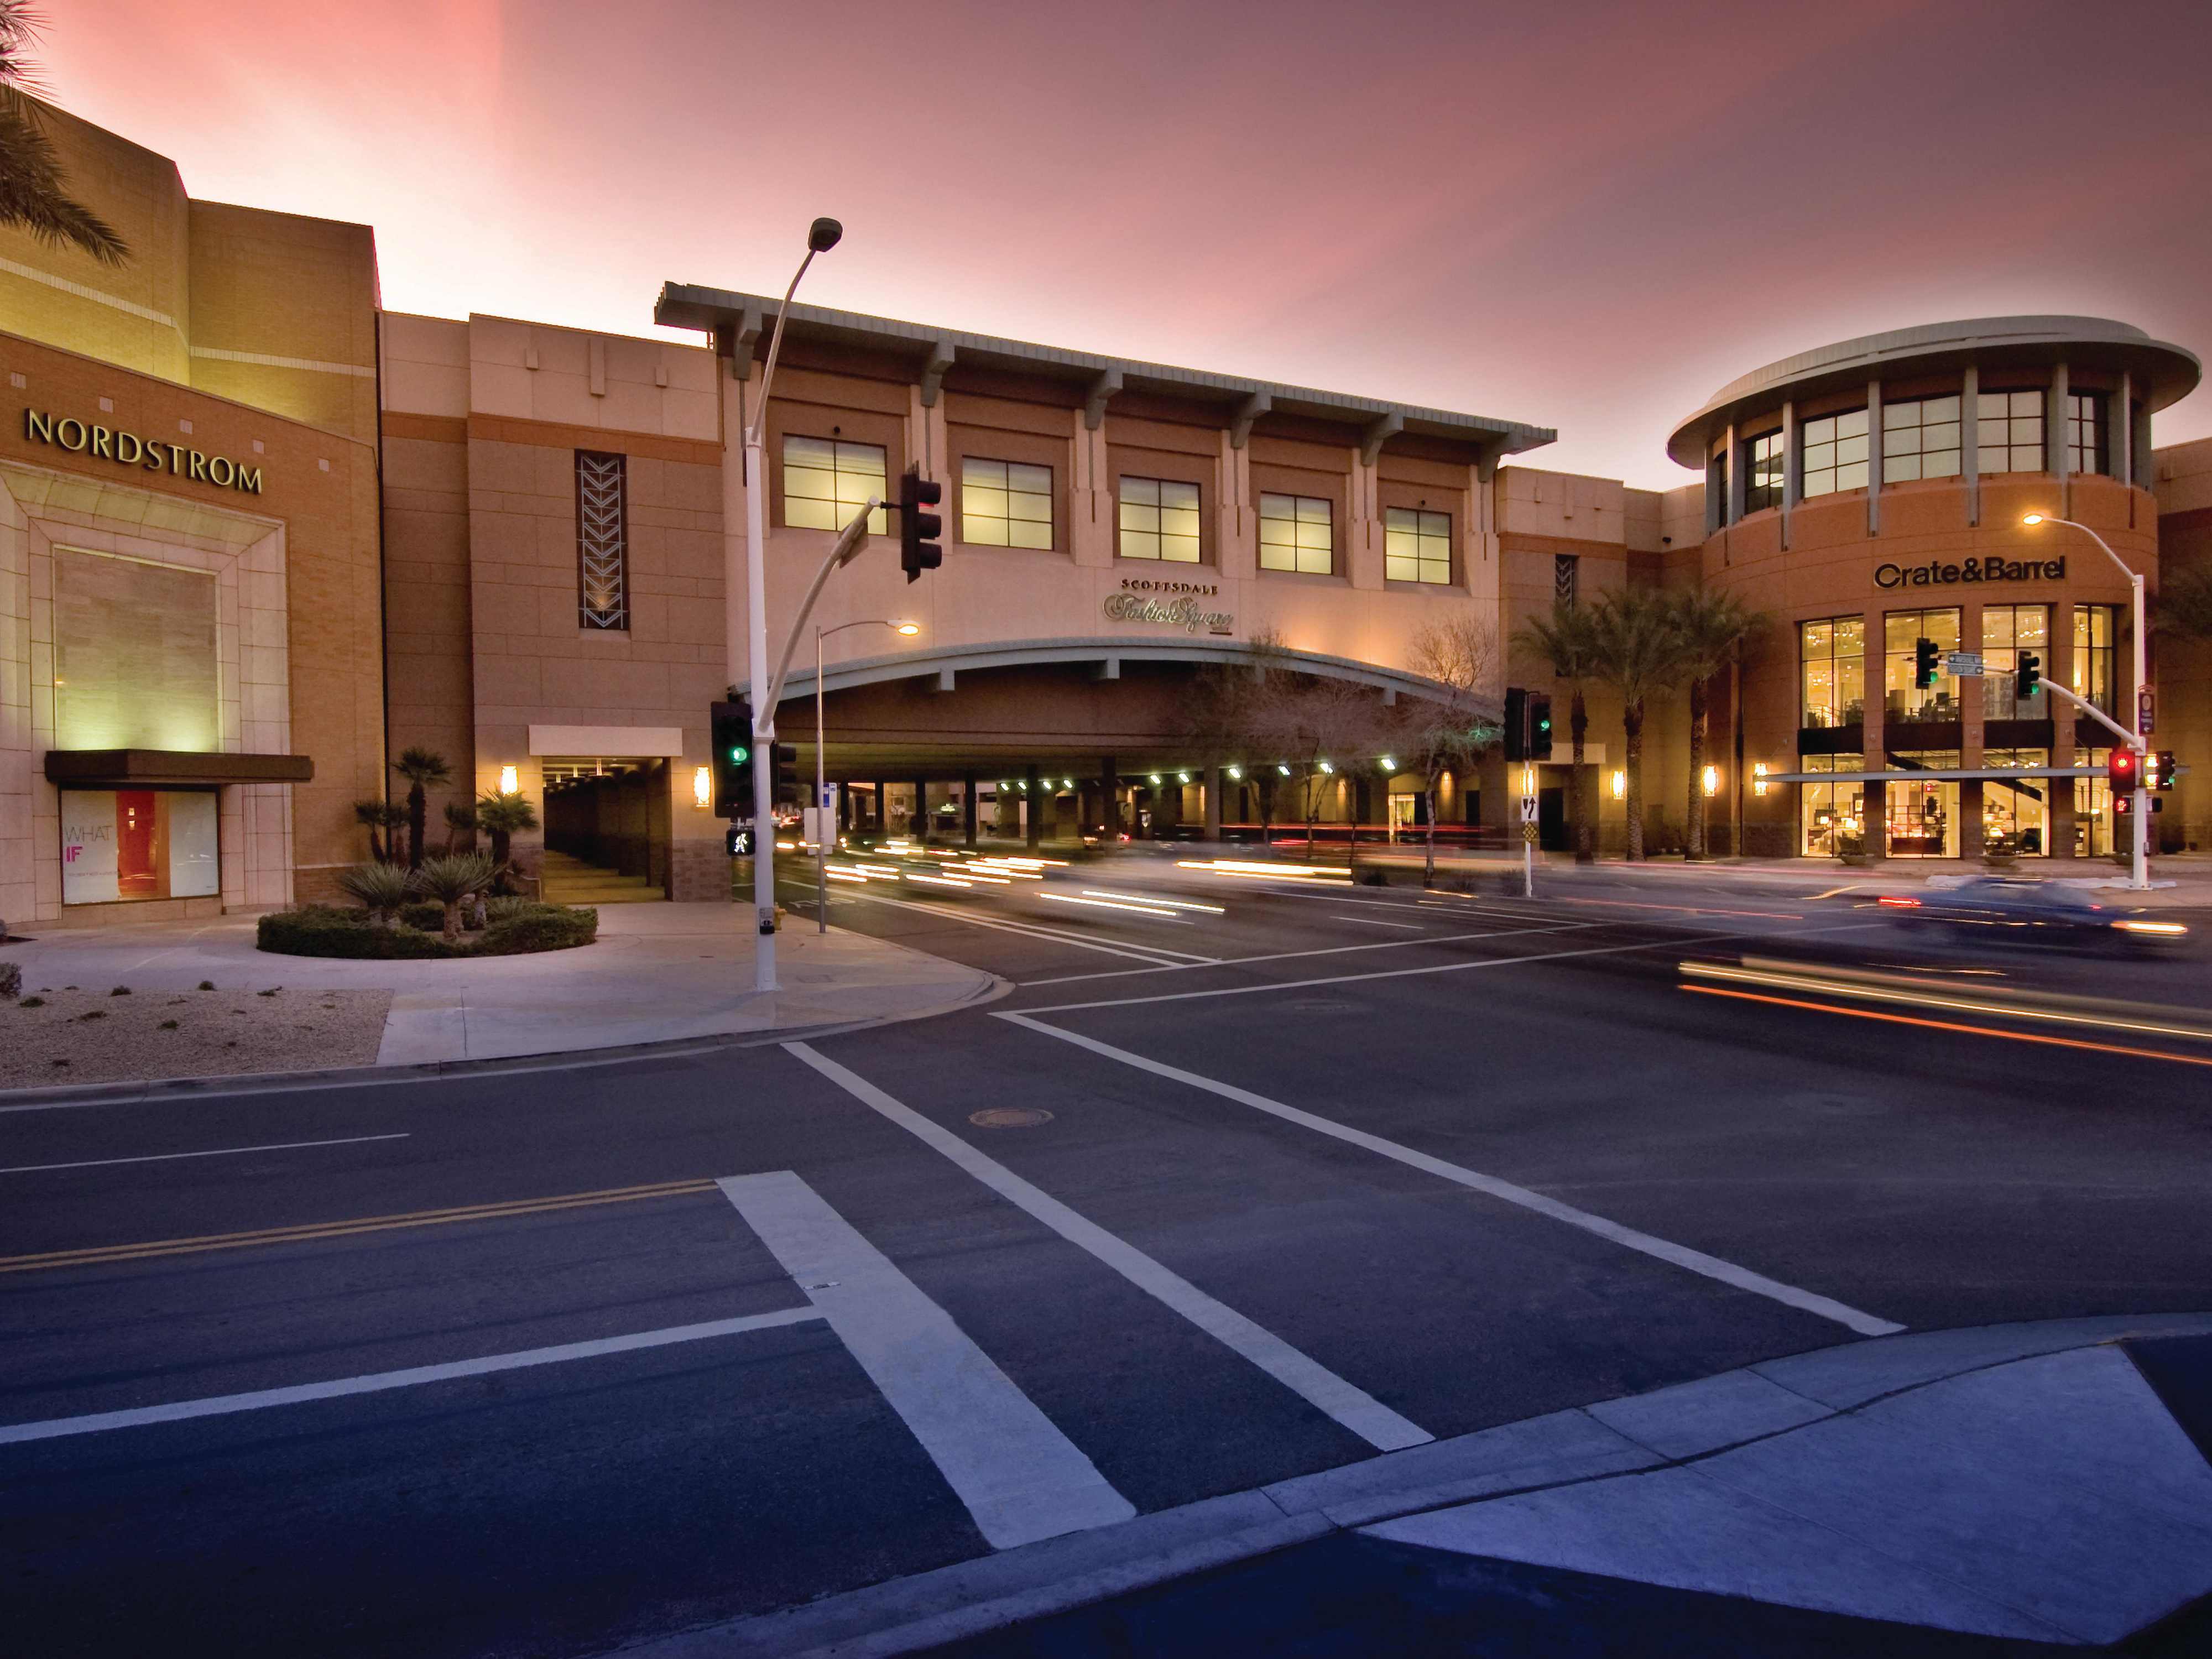 Our hotel is located near Scottsdale Fashion Square